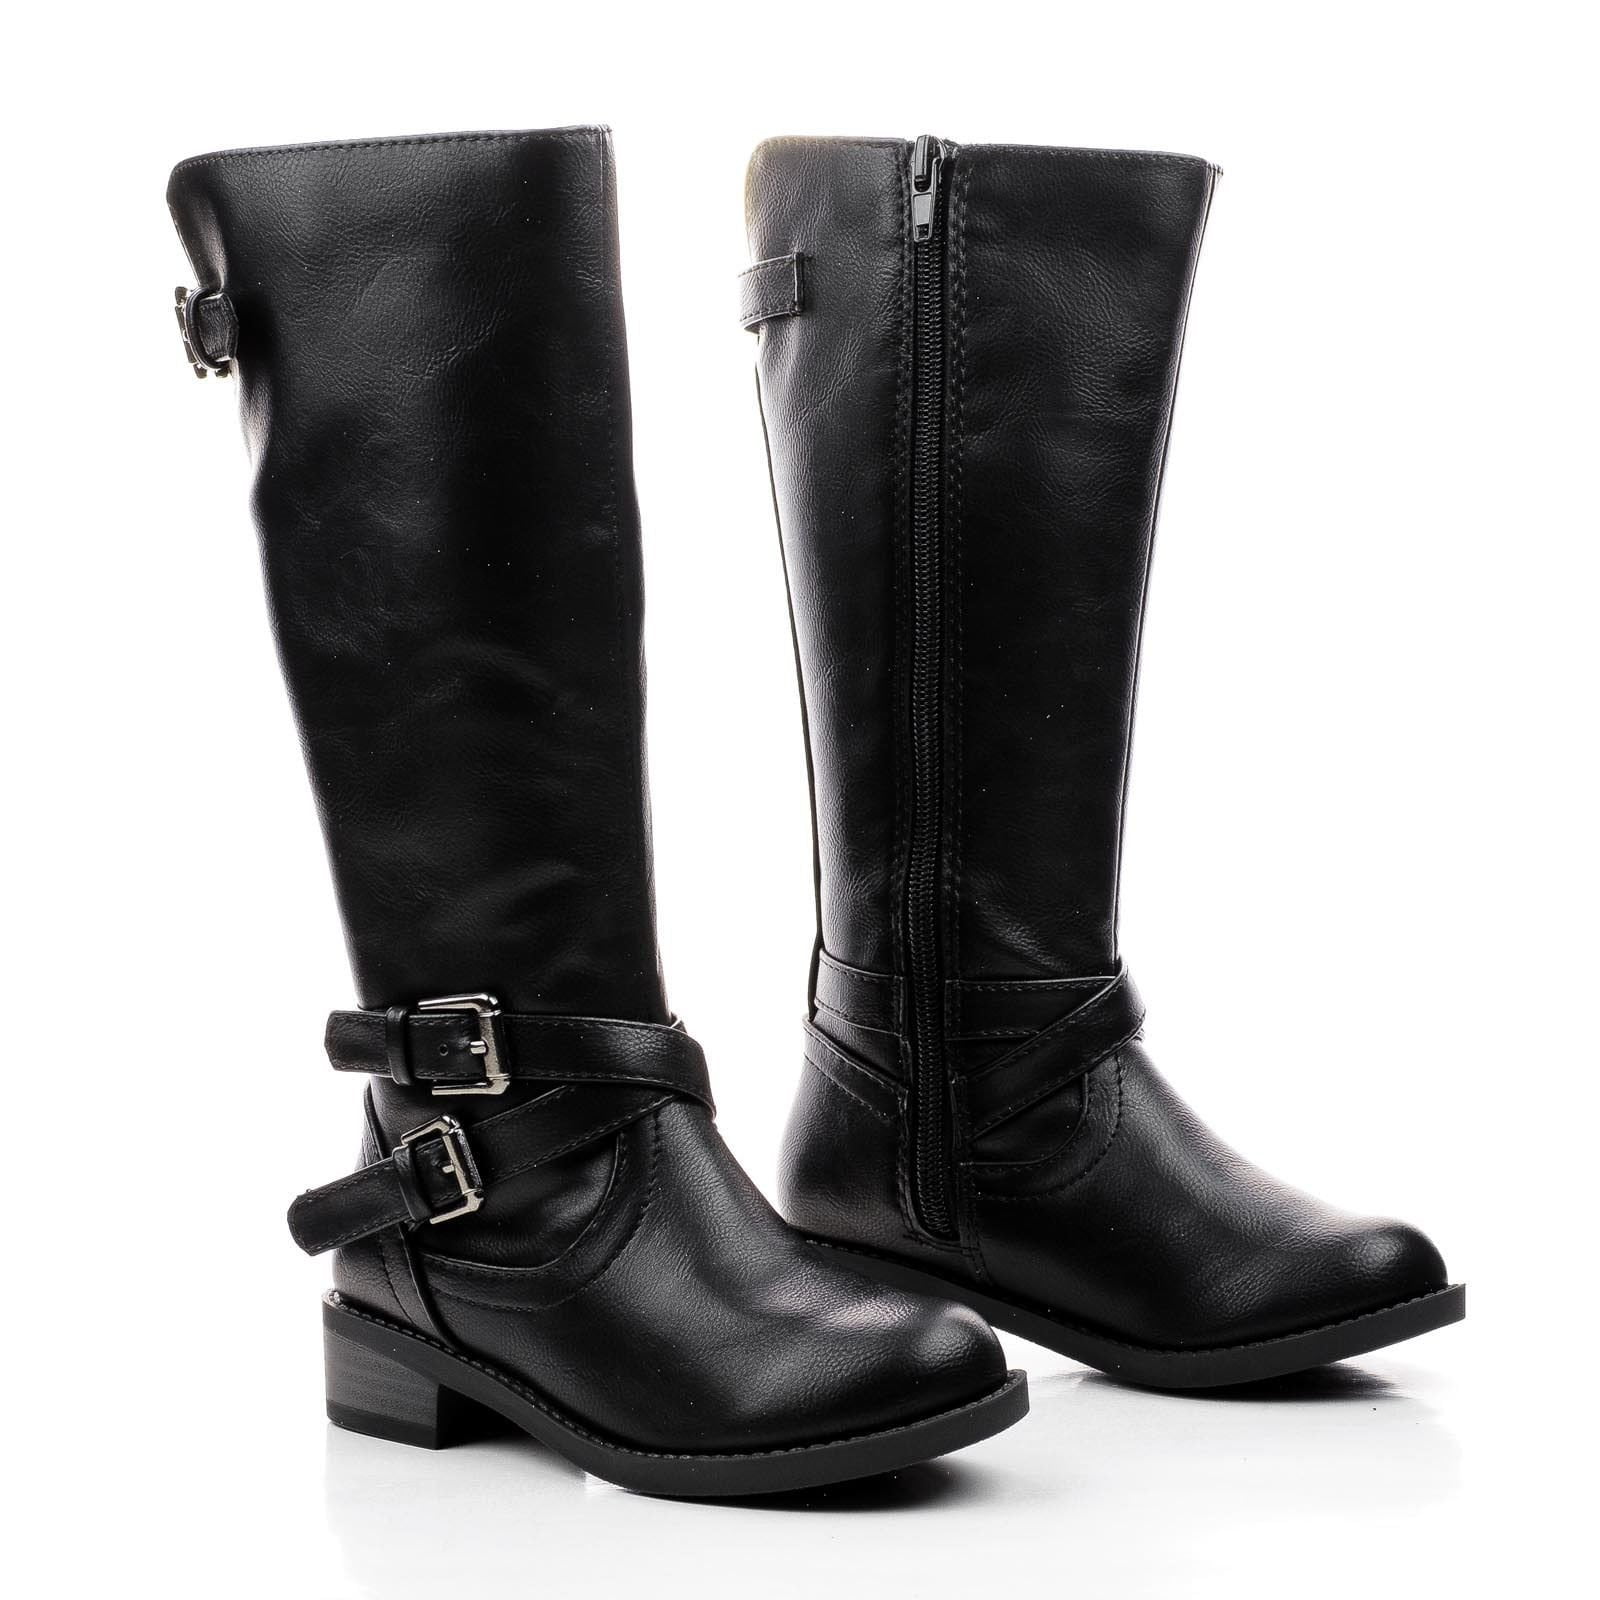 children's knee high leather boots